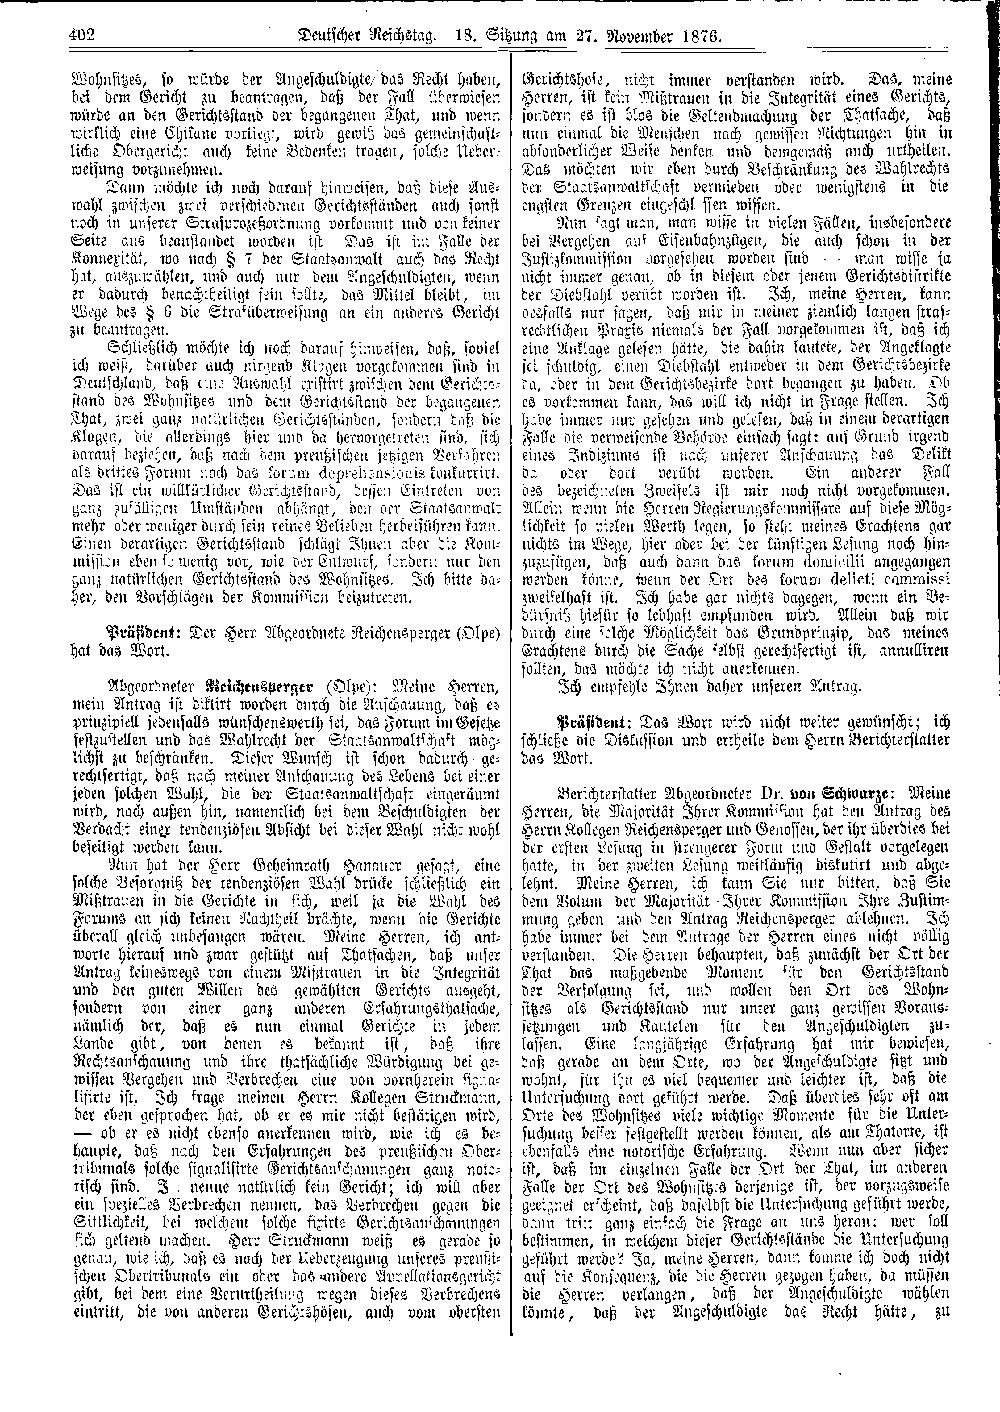 Scan of page 402